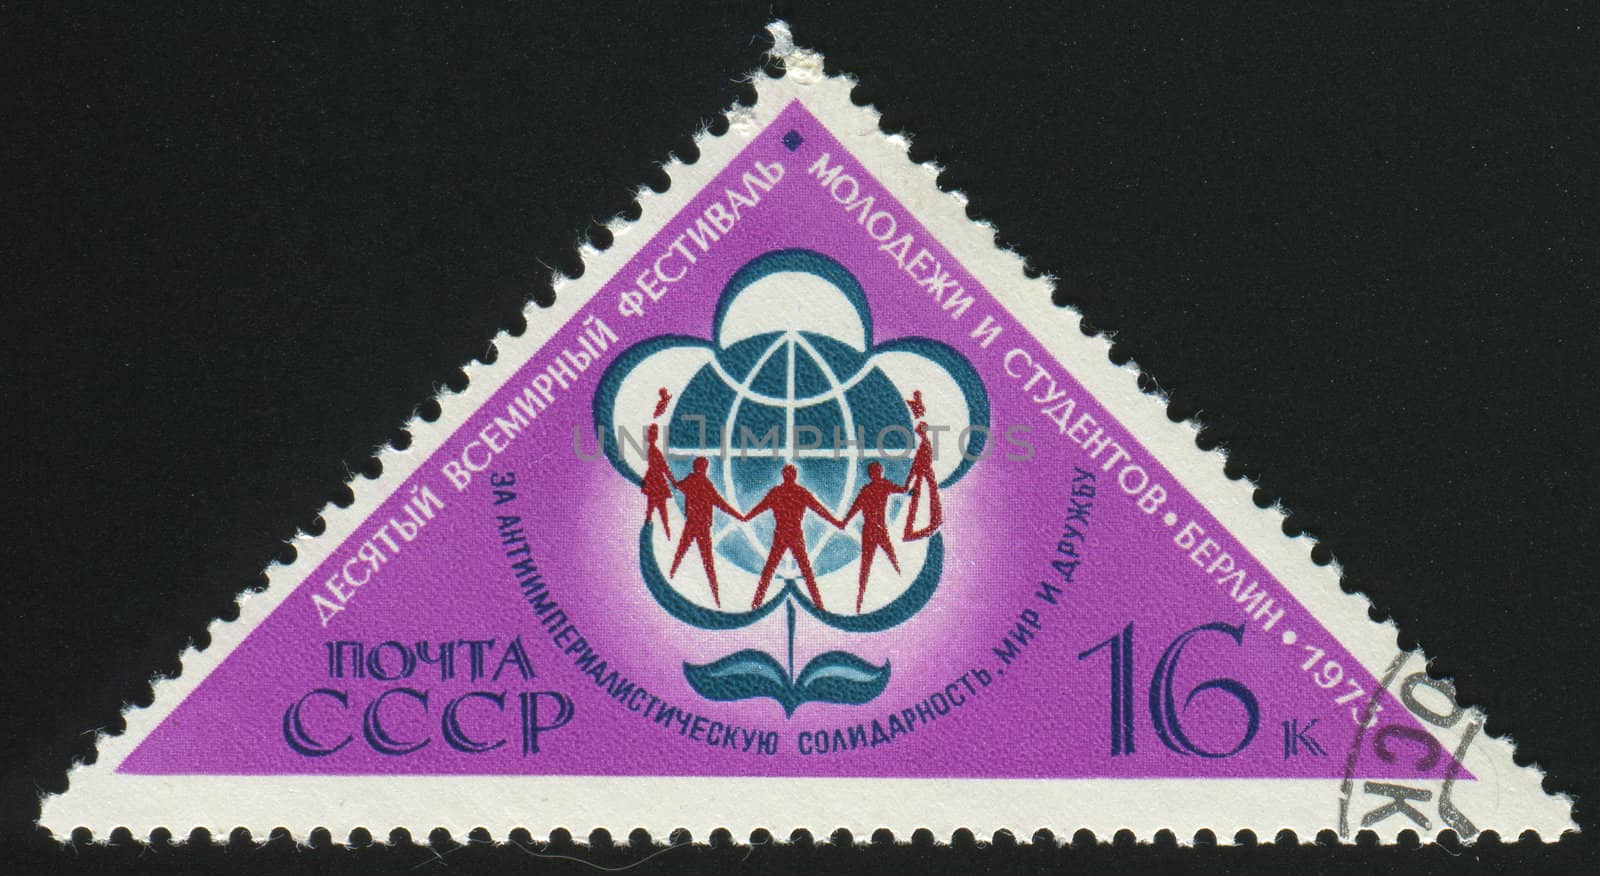 RUSSIA - CIRCA 1973: stamp printed by Russia, shows 10th World Festiva of Youth and Students, Berlin, circa 1973.